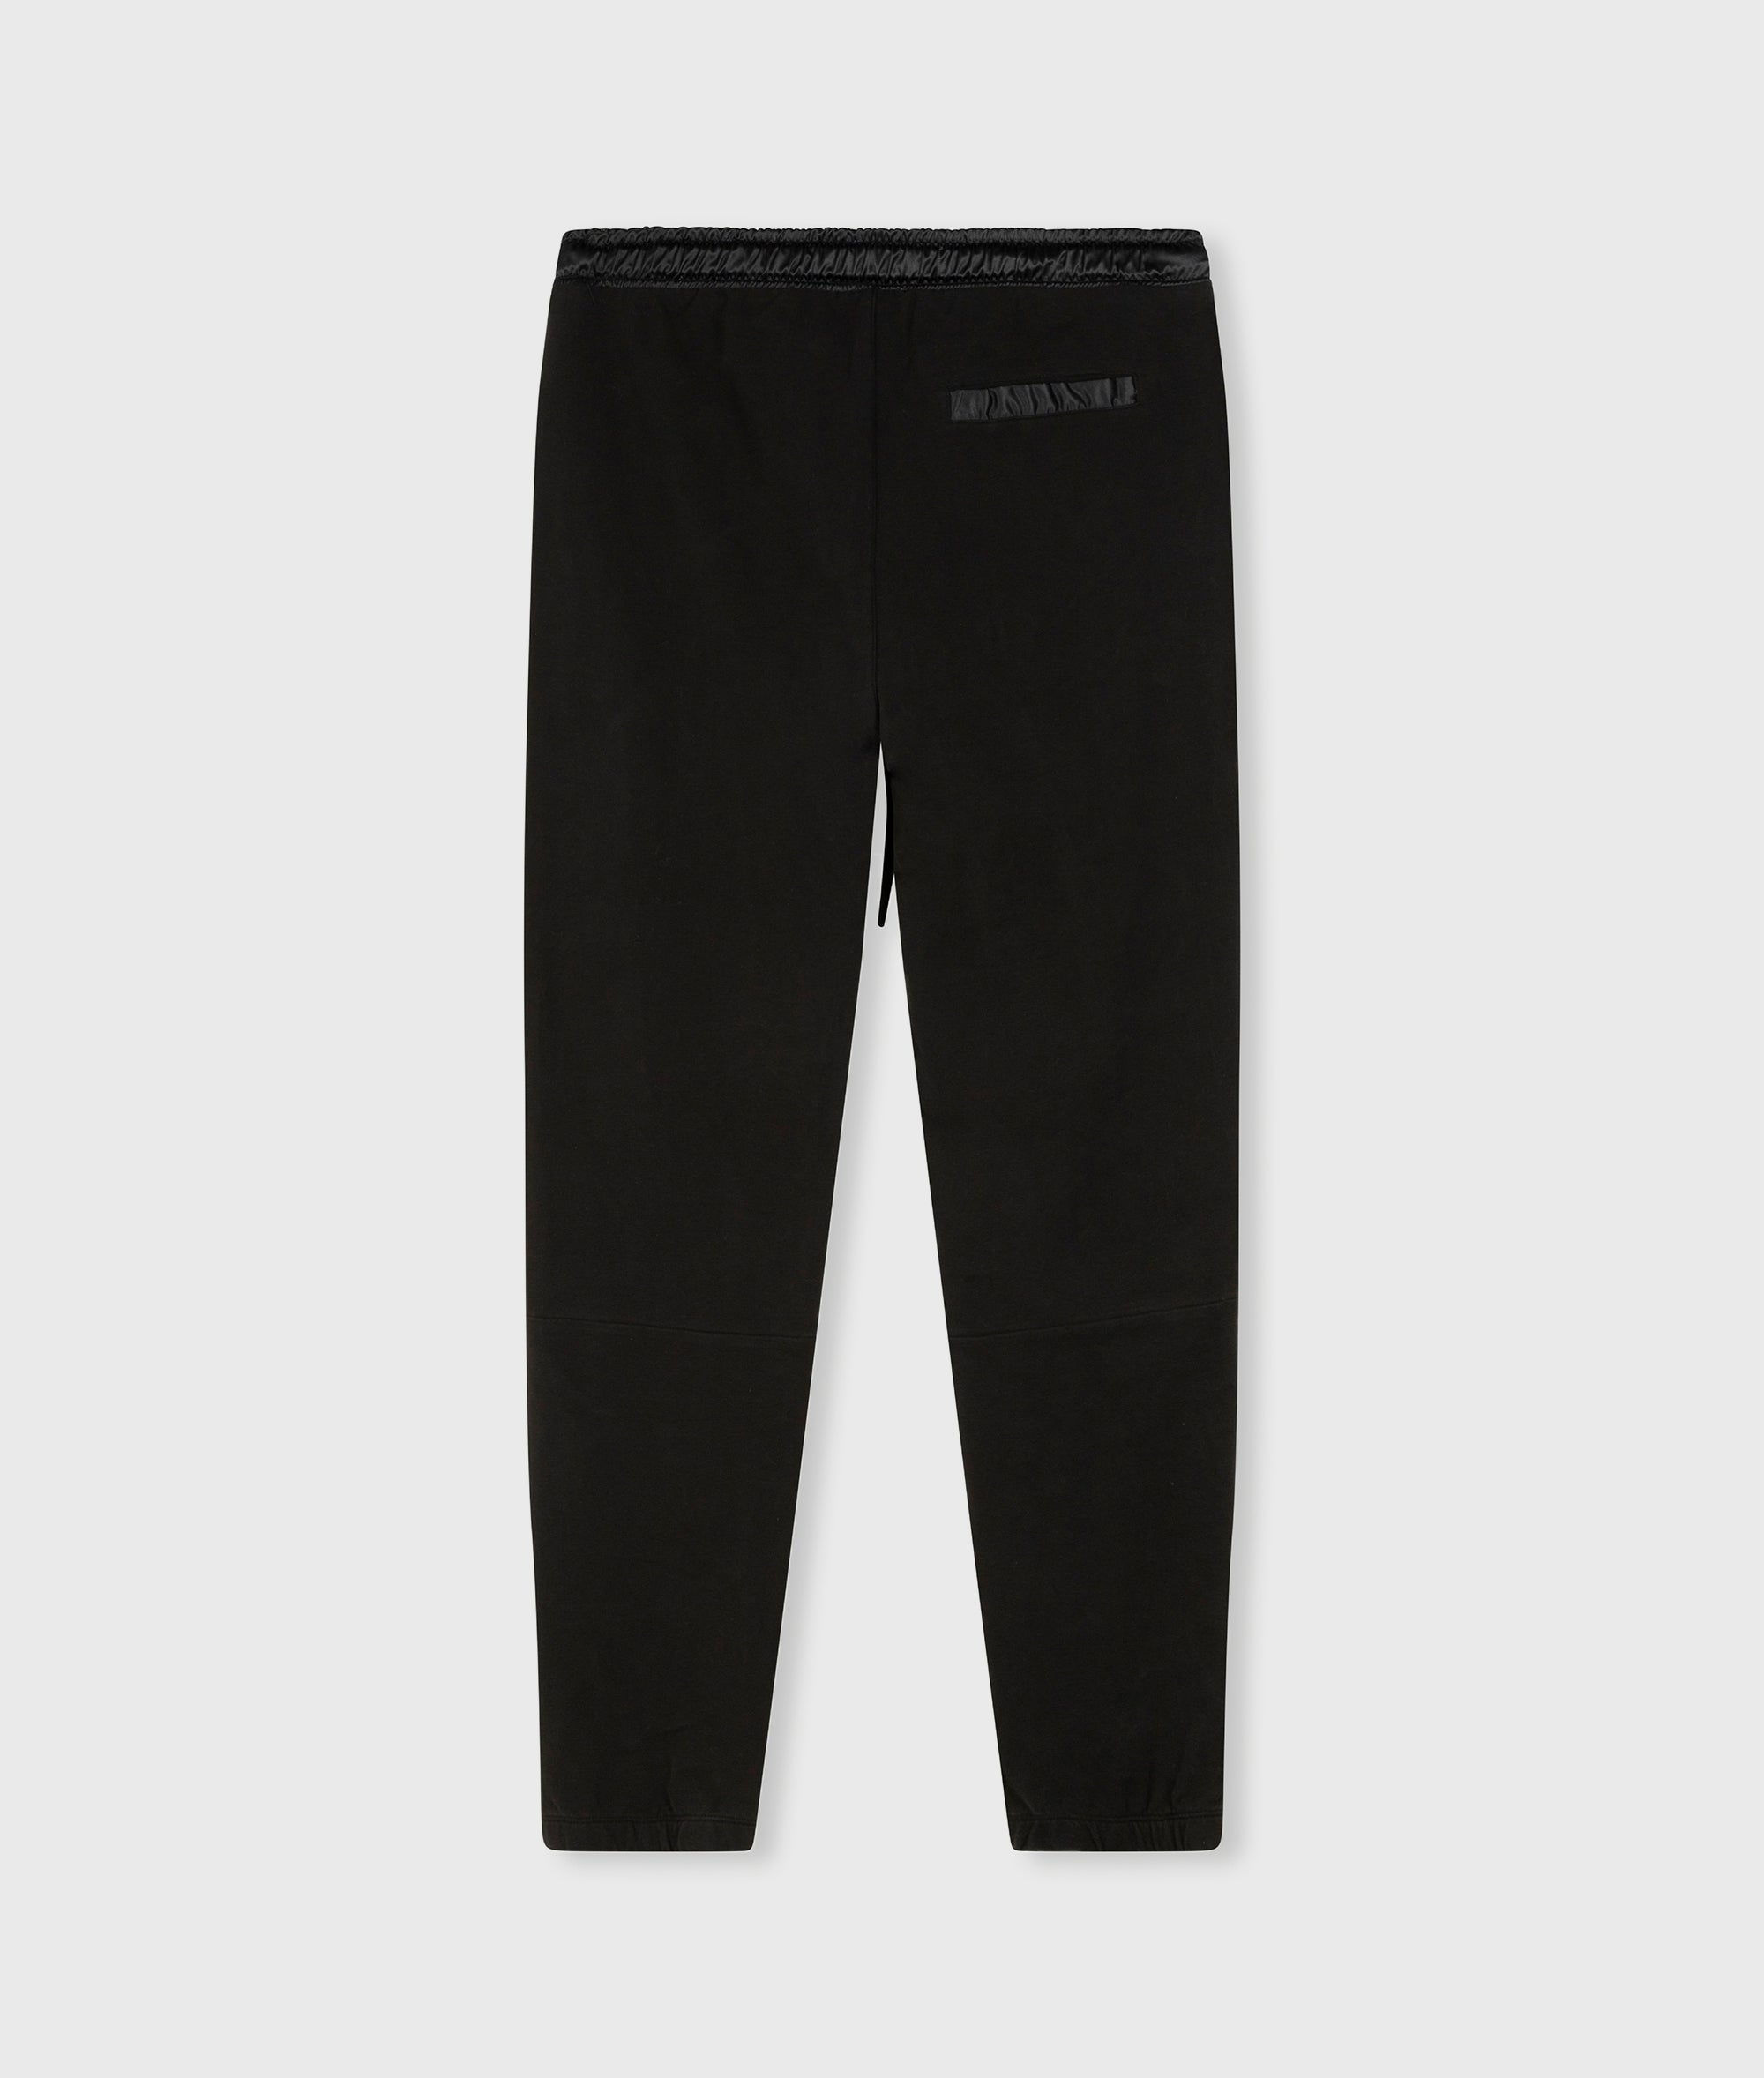 fear of god essentials, Pants & Jumpsuits, Fear Of God Essentials Leggings  Dark Slate Stretch Limo Black Womens Size Small